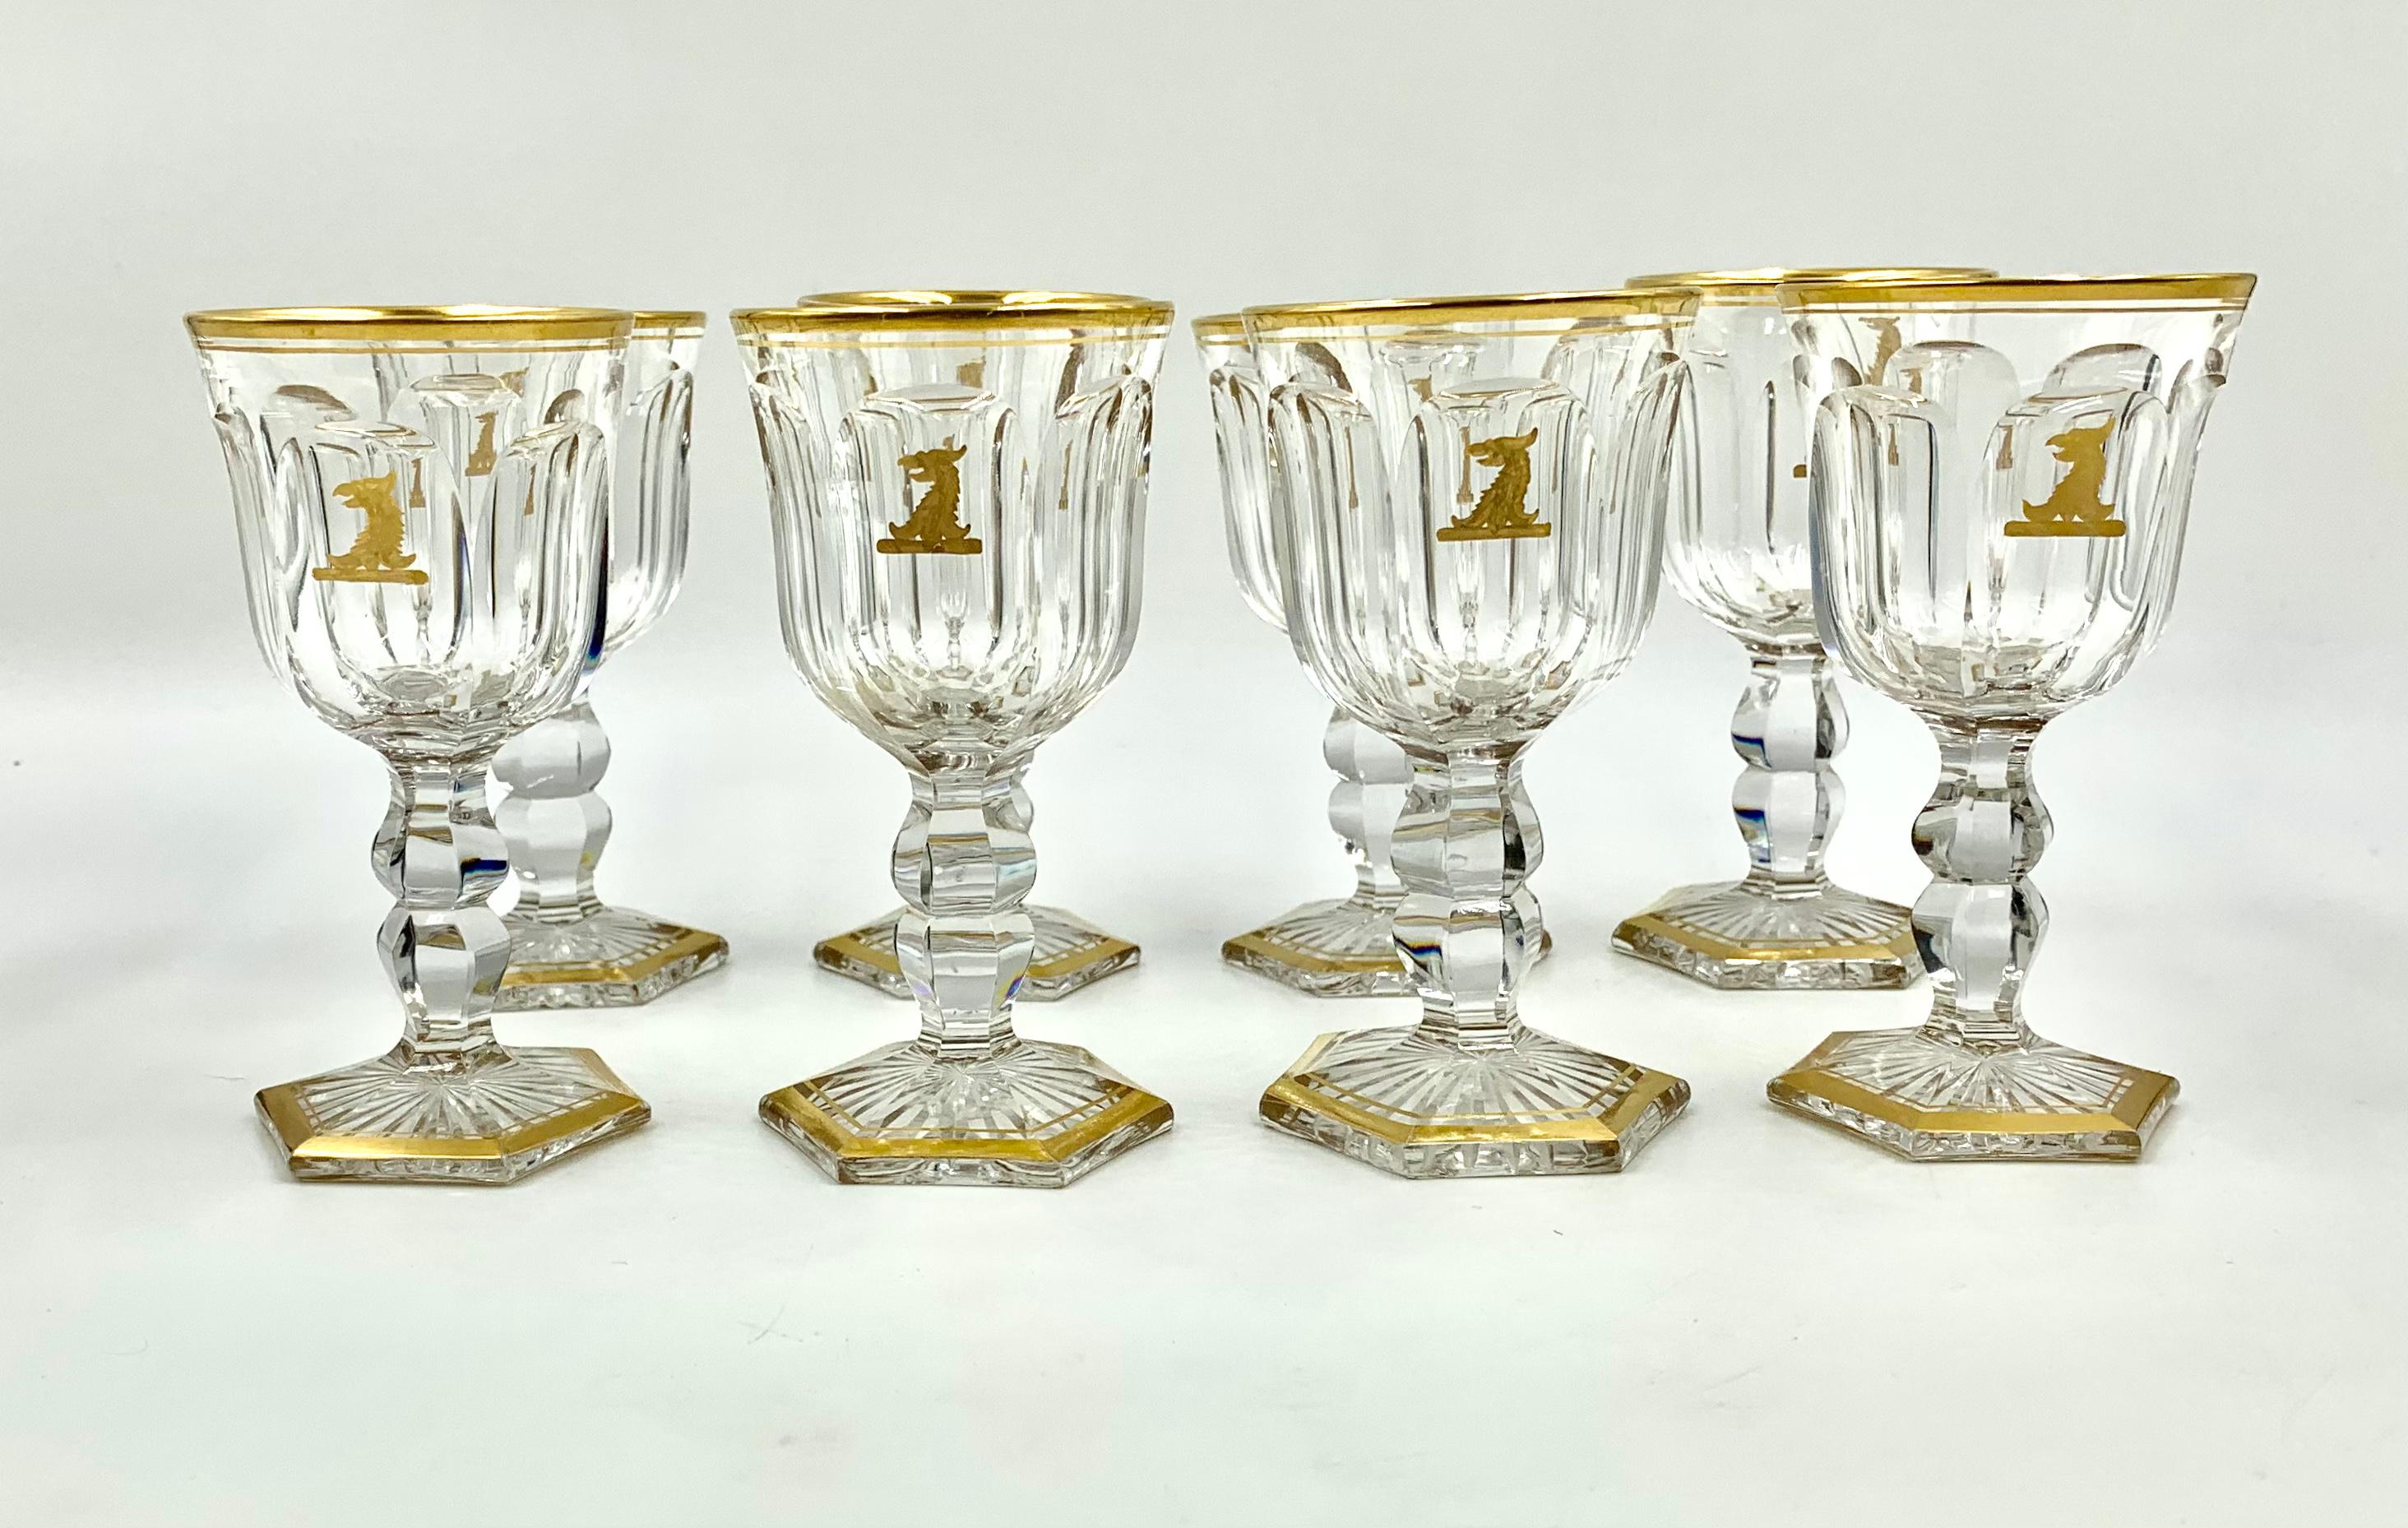 Antique Baccarat Crystal Empire Armorial Crest 34 Piece Stemware Service for 8 For Sale 8